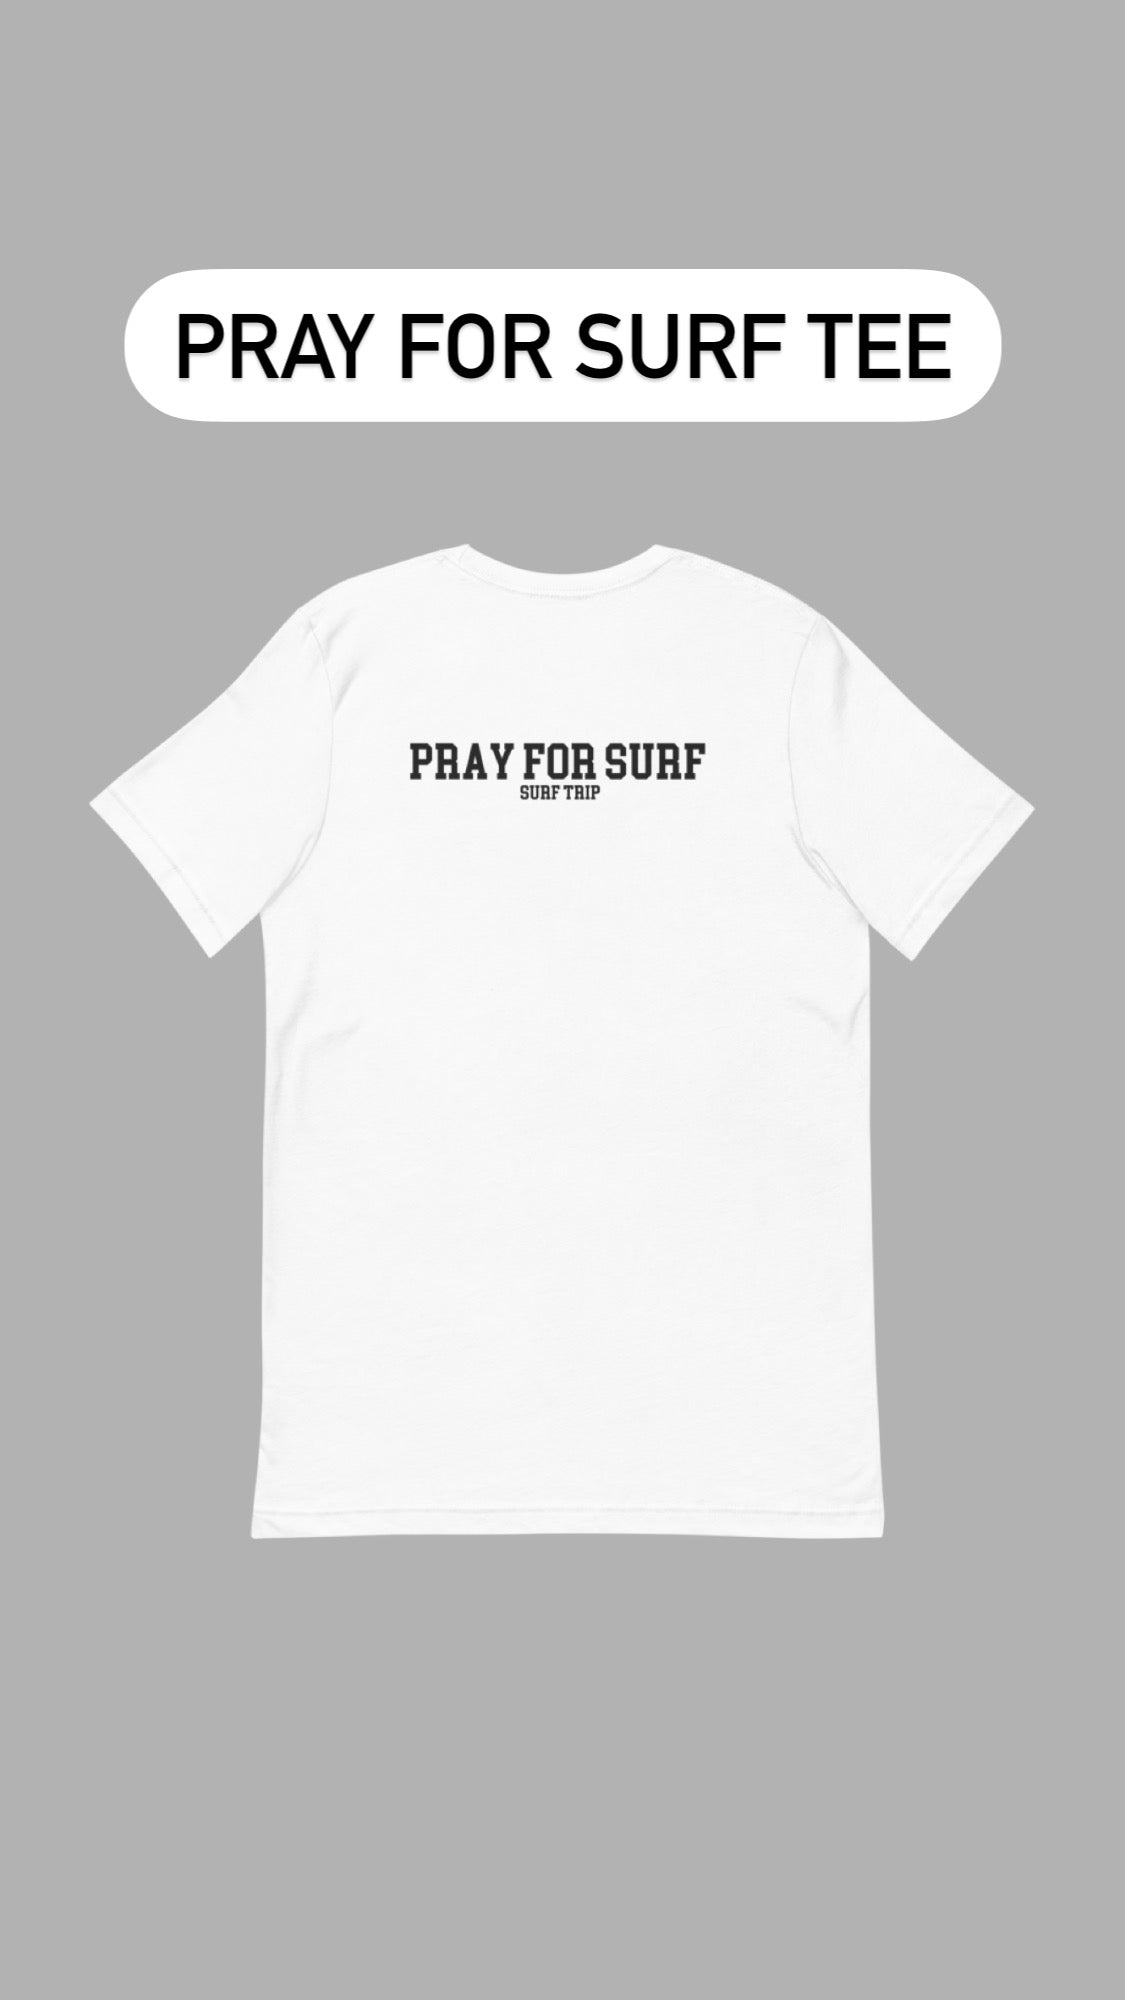 Pray For Surf Tee - Surf Trip Supply